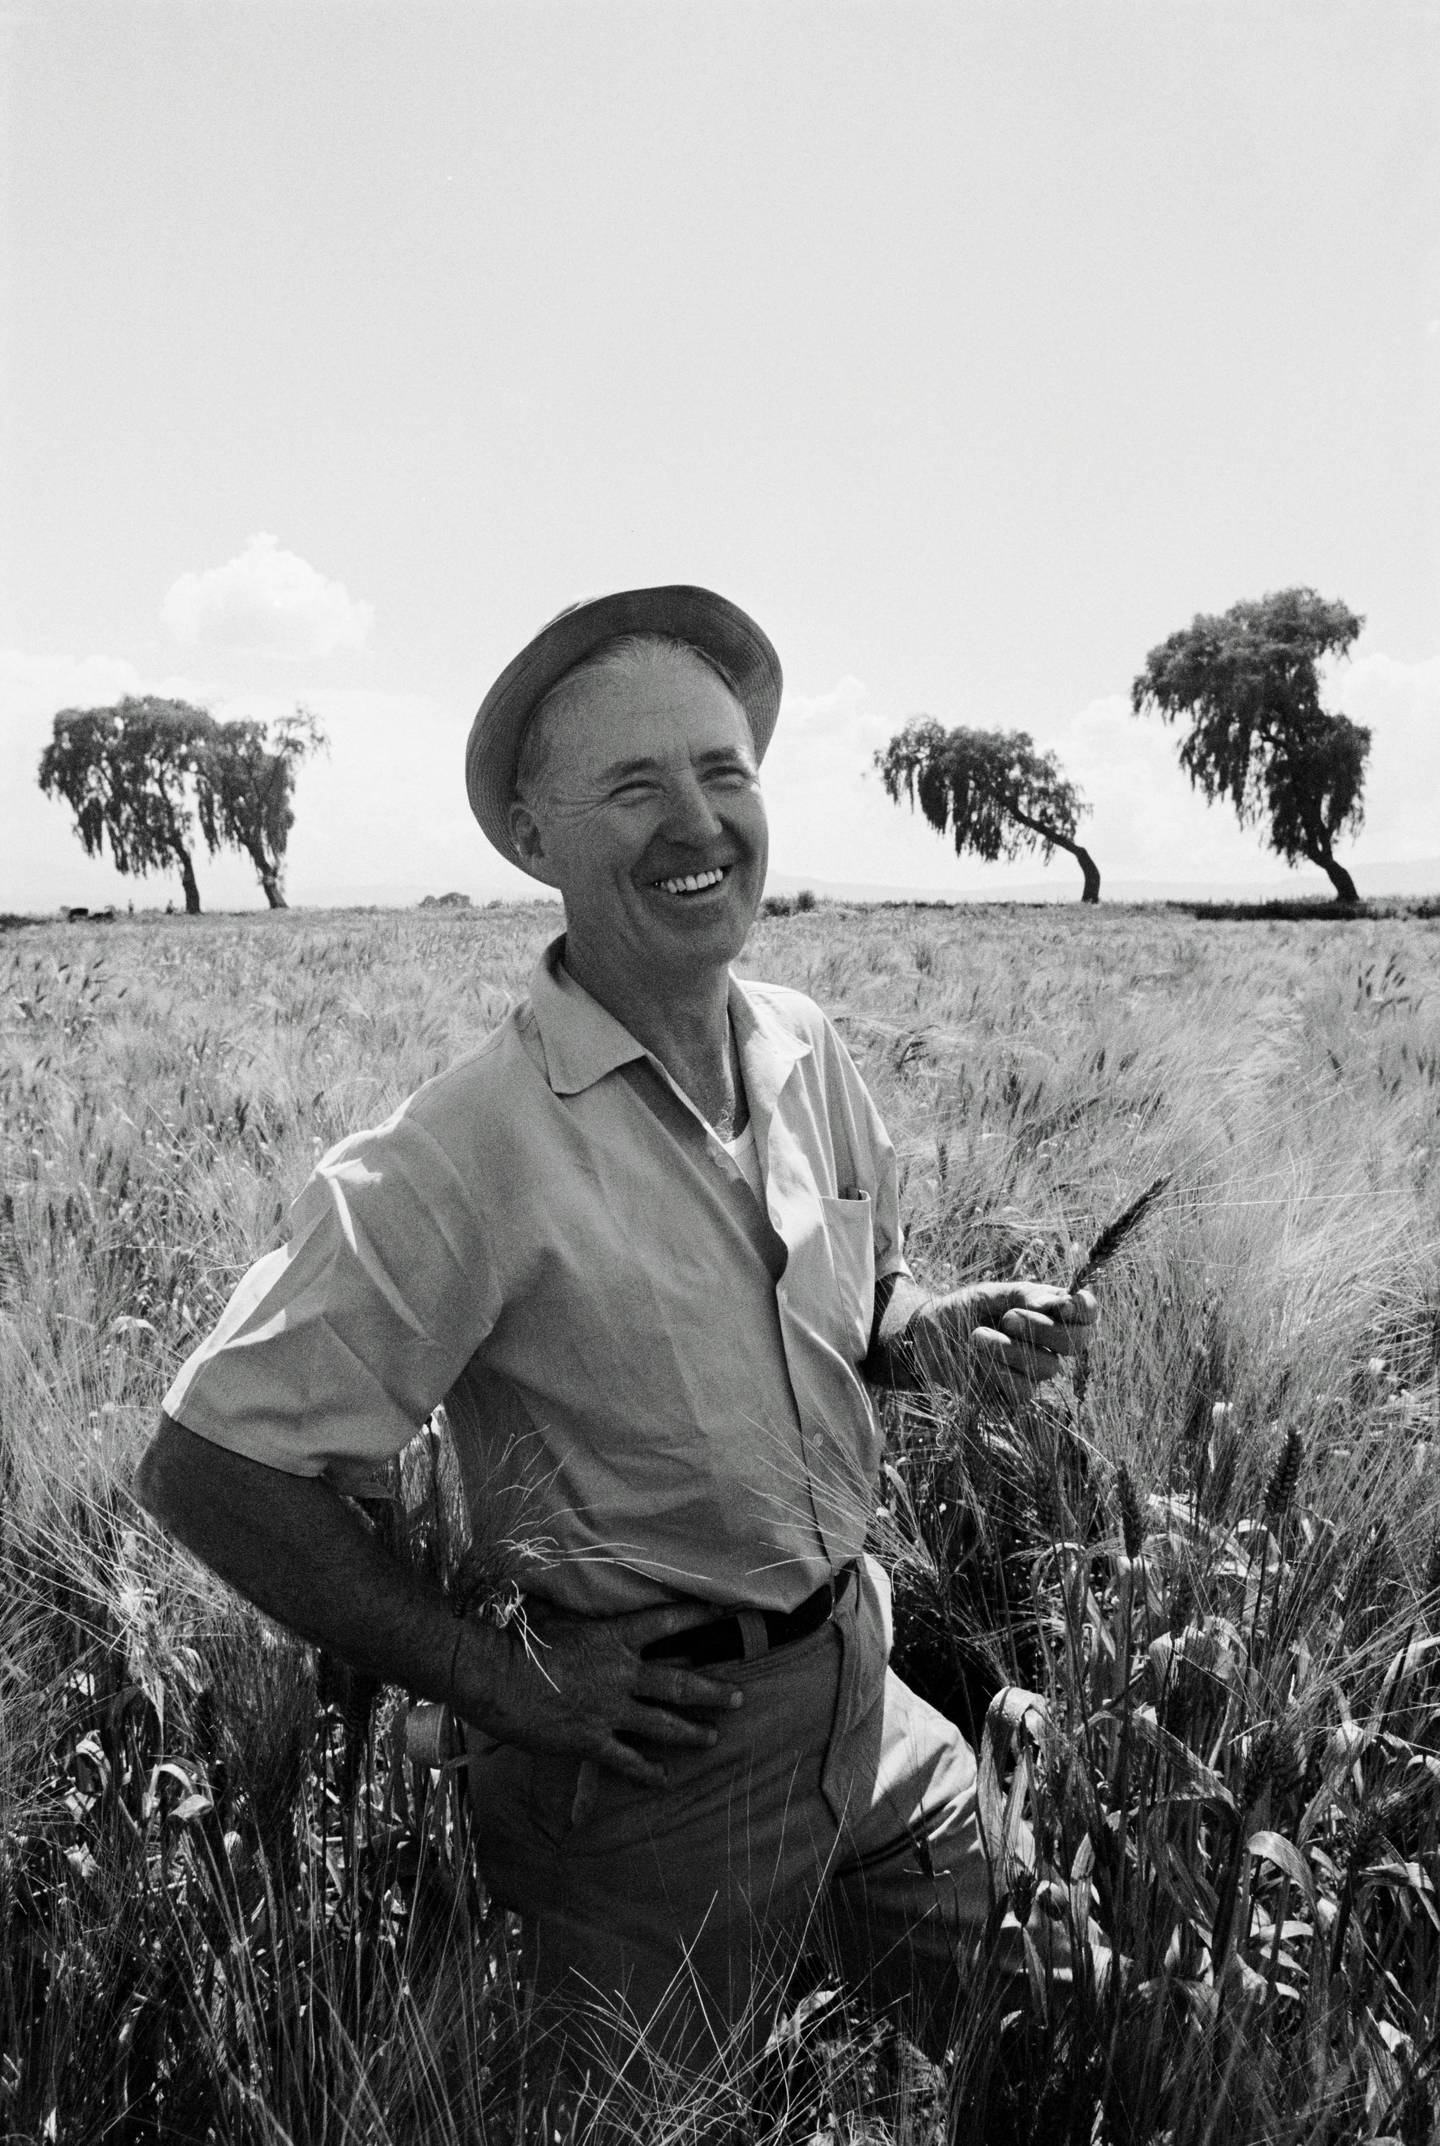 Norman Borlaug, the late American agronomist, played a major role in India's 'Green Revolution'. Getty Images